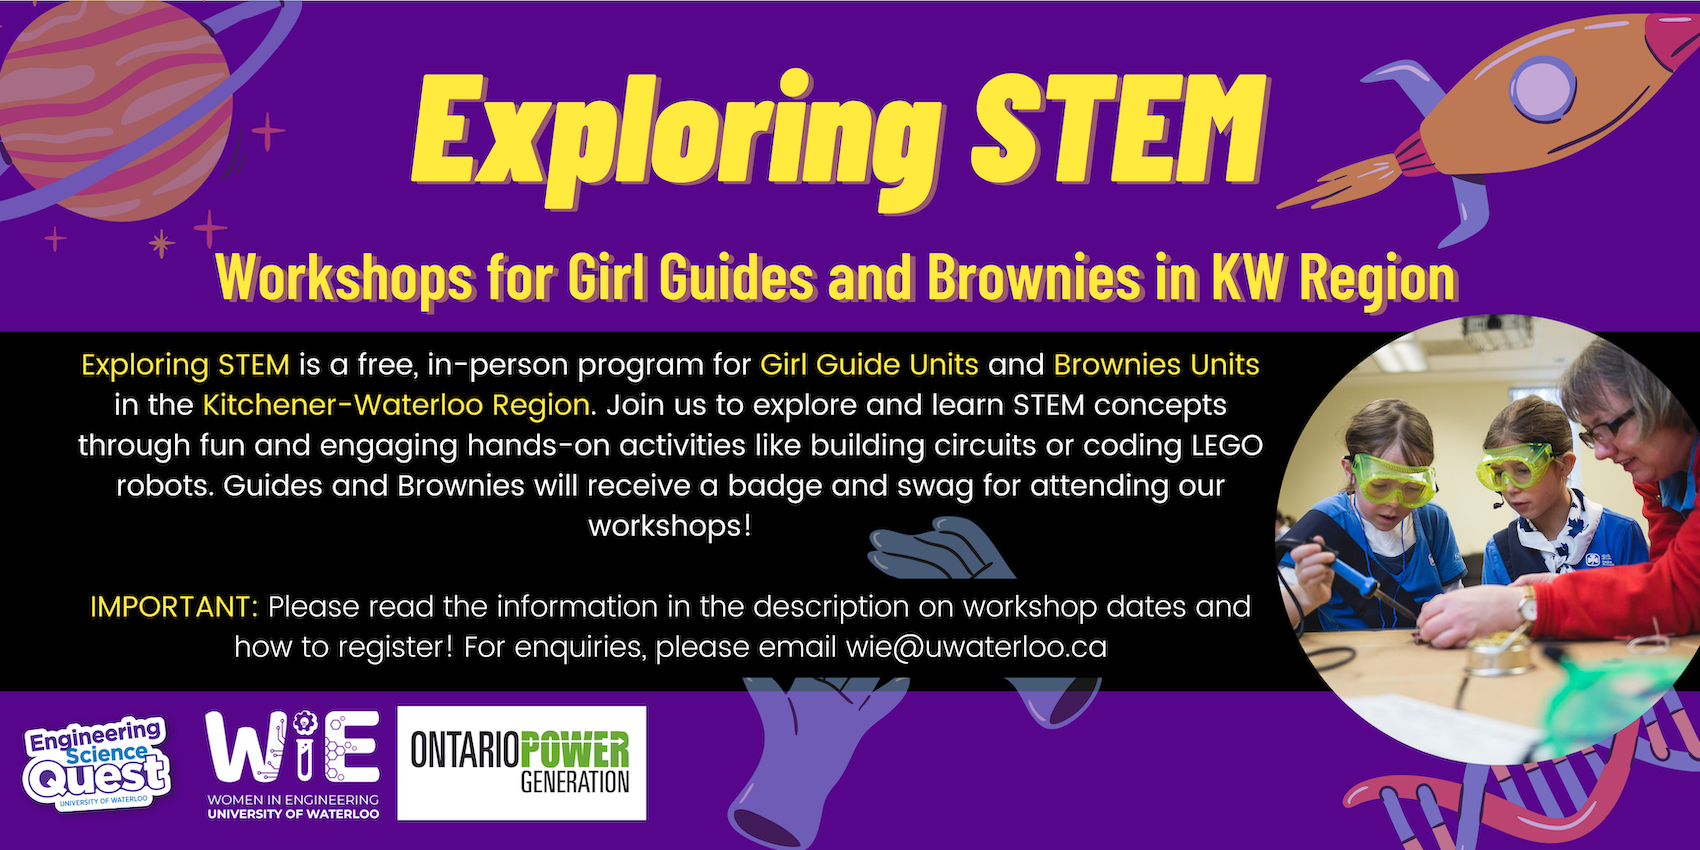 Banner about exploring stem workshop for girl guides and brownie units, includes an image of brownies and some planets images